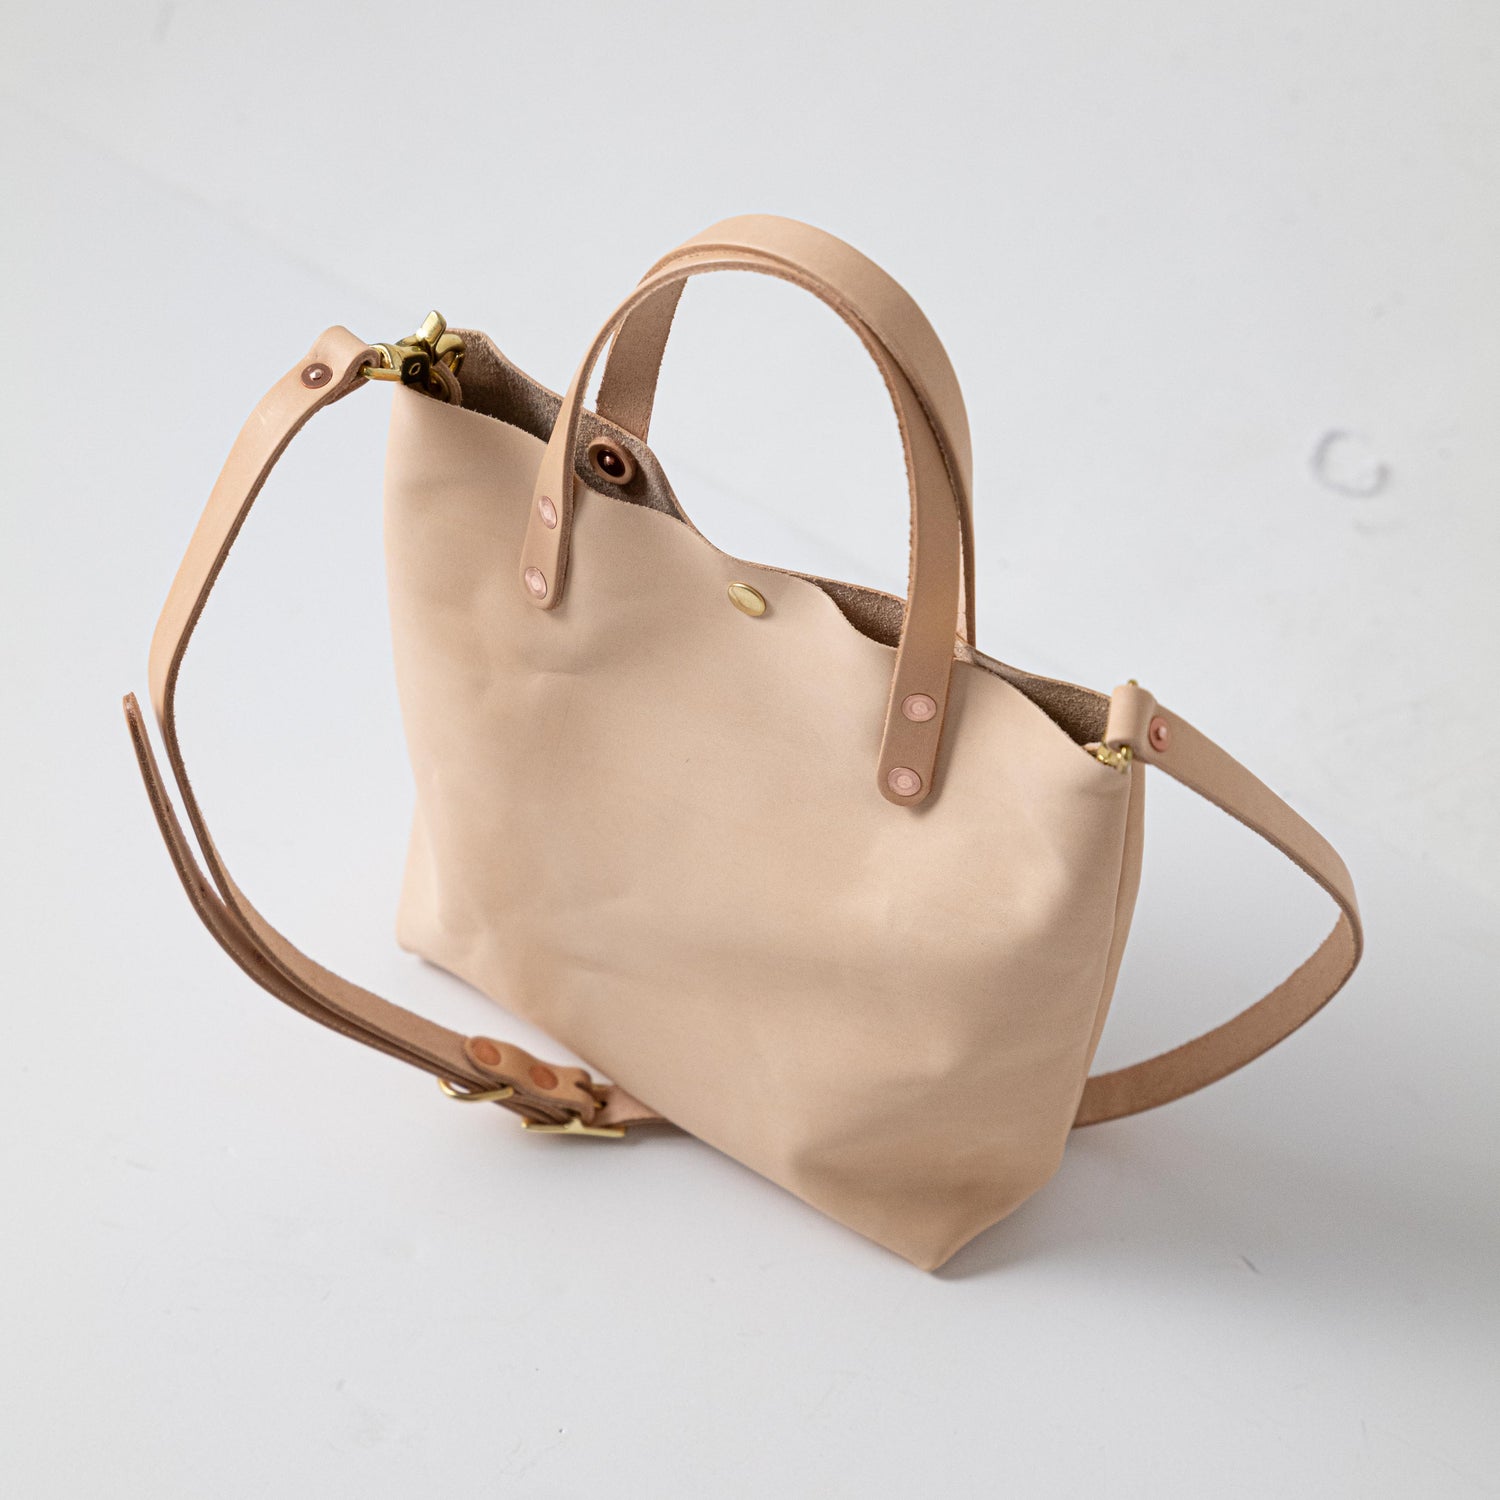 Vegetable Tanned Tote | Vachetta Tote Bag Handmade at KMM & Co. 11-inch +$25 / Crossbody Strap (FINAL Sale) +$65